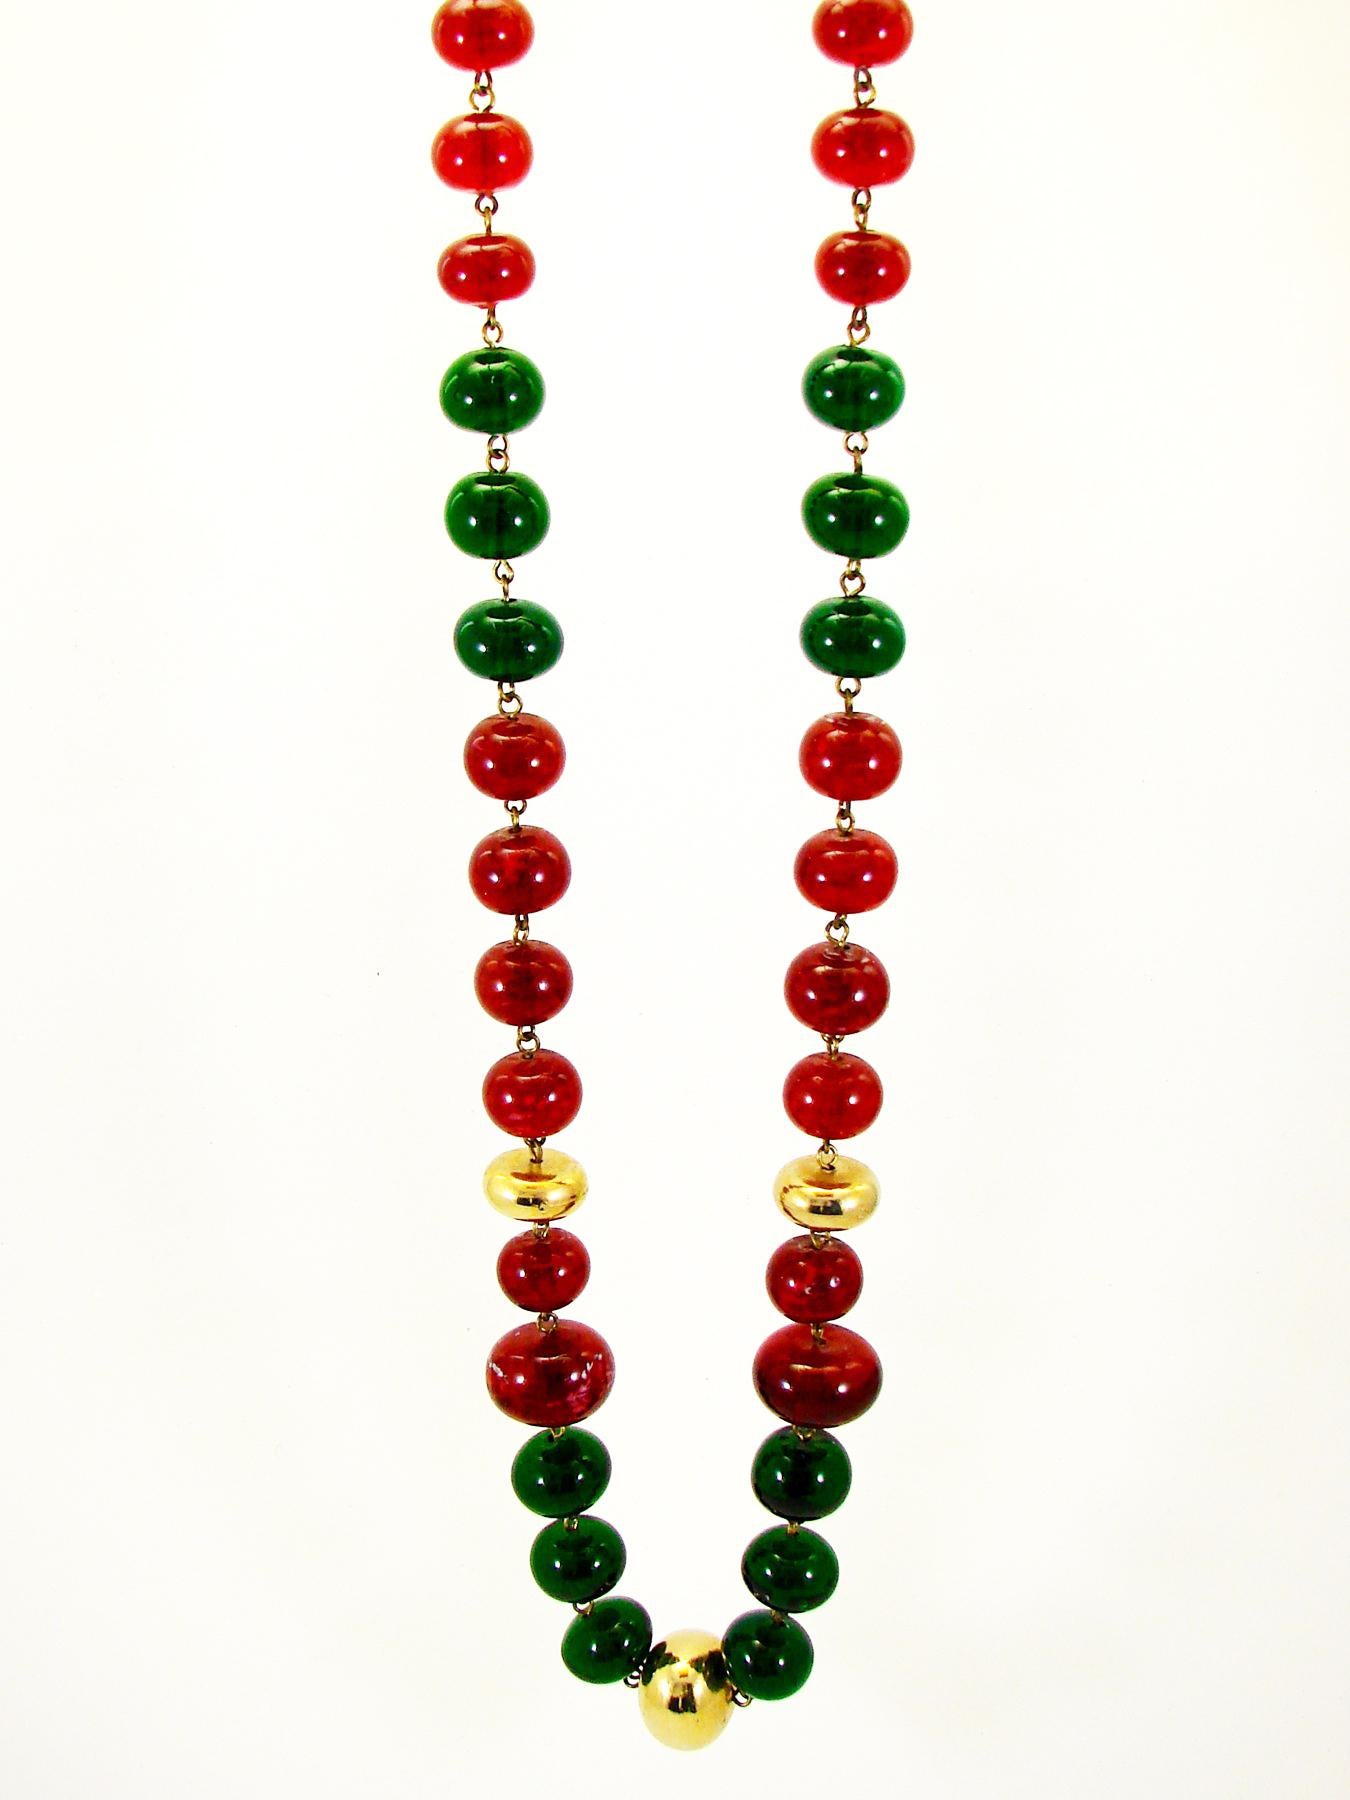 Women's or Men's Vintage Chanel Beaded Necklace Red & Green Poured Glass Goossens 1970s 